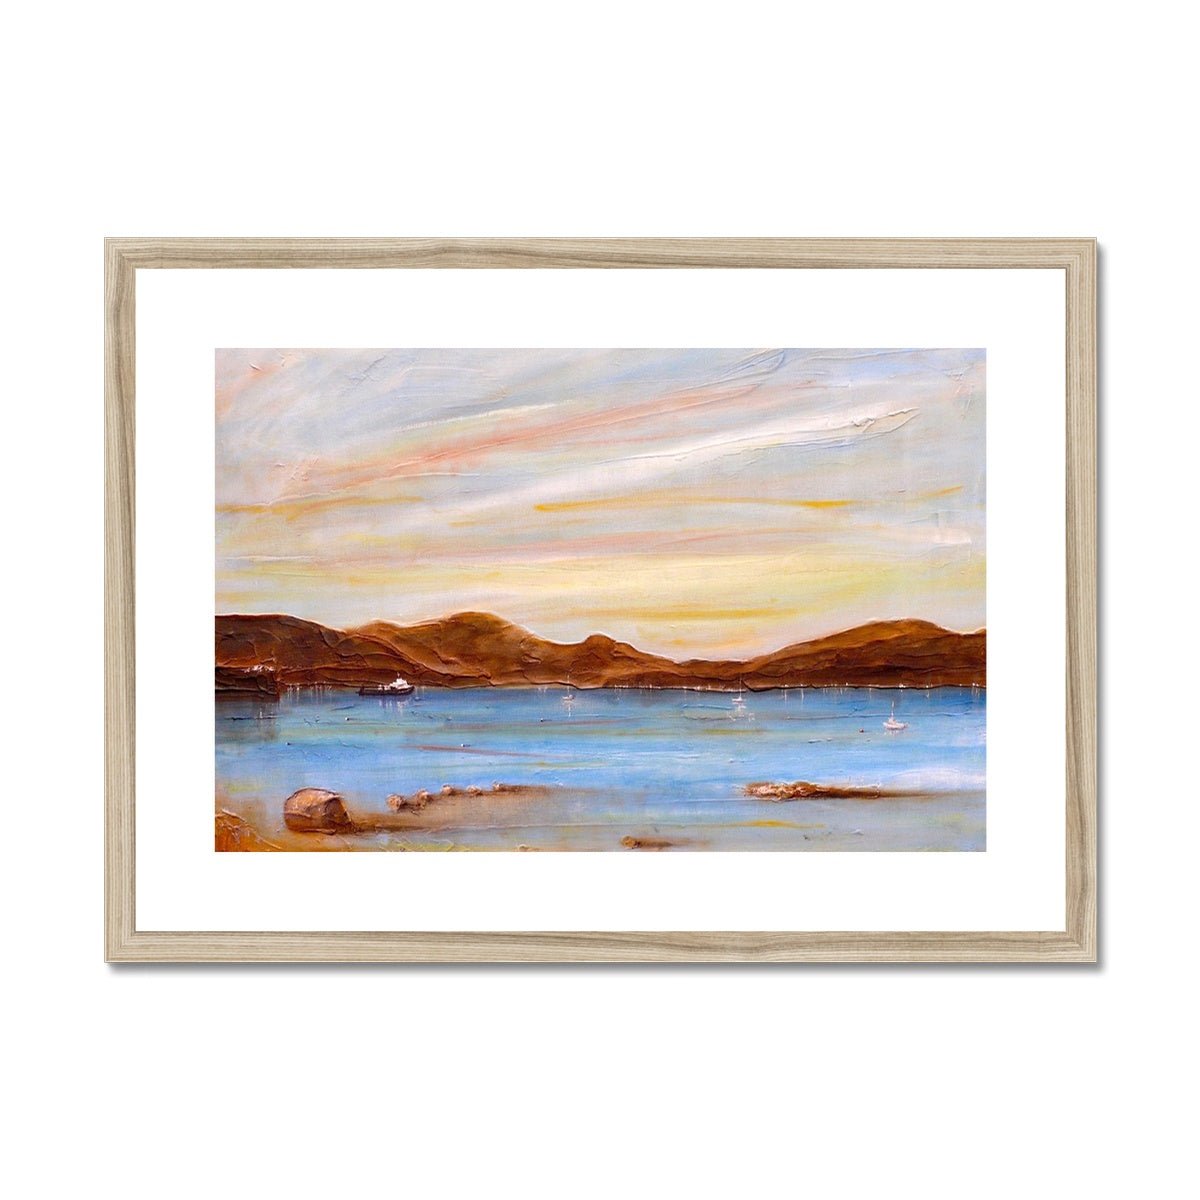 The Last Ferry To Dunoon Painting | Framed & Mounted Prints From Scotland-Framed & Mounted Prints-River Clyde Art Gallery-A2 Landscape-Natural Frame-Paintings, Prints, Homeware, Art Gifts From Scotland By Scottish Artist Kevin Hunter